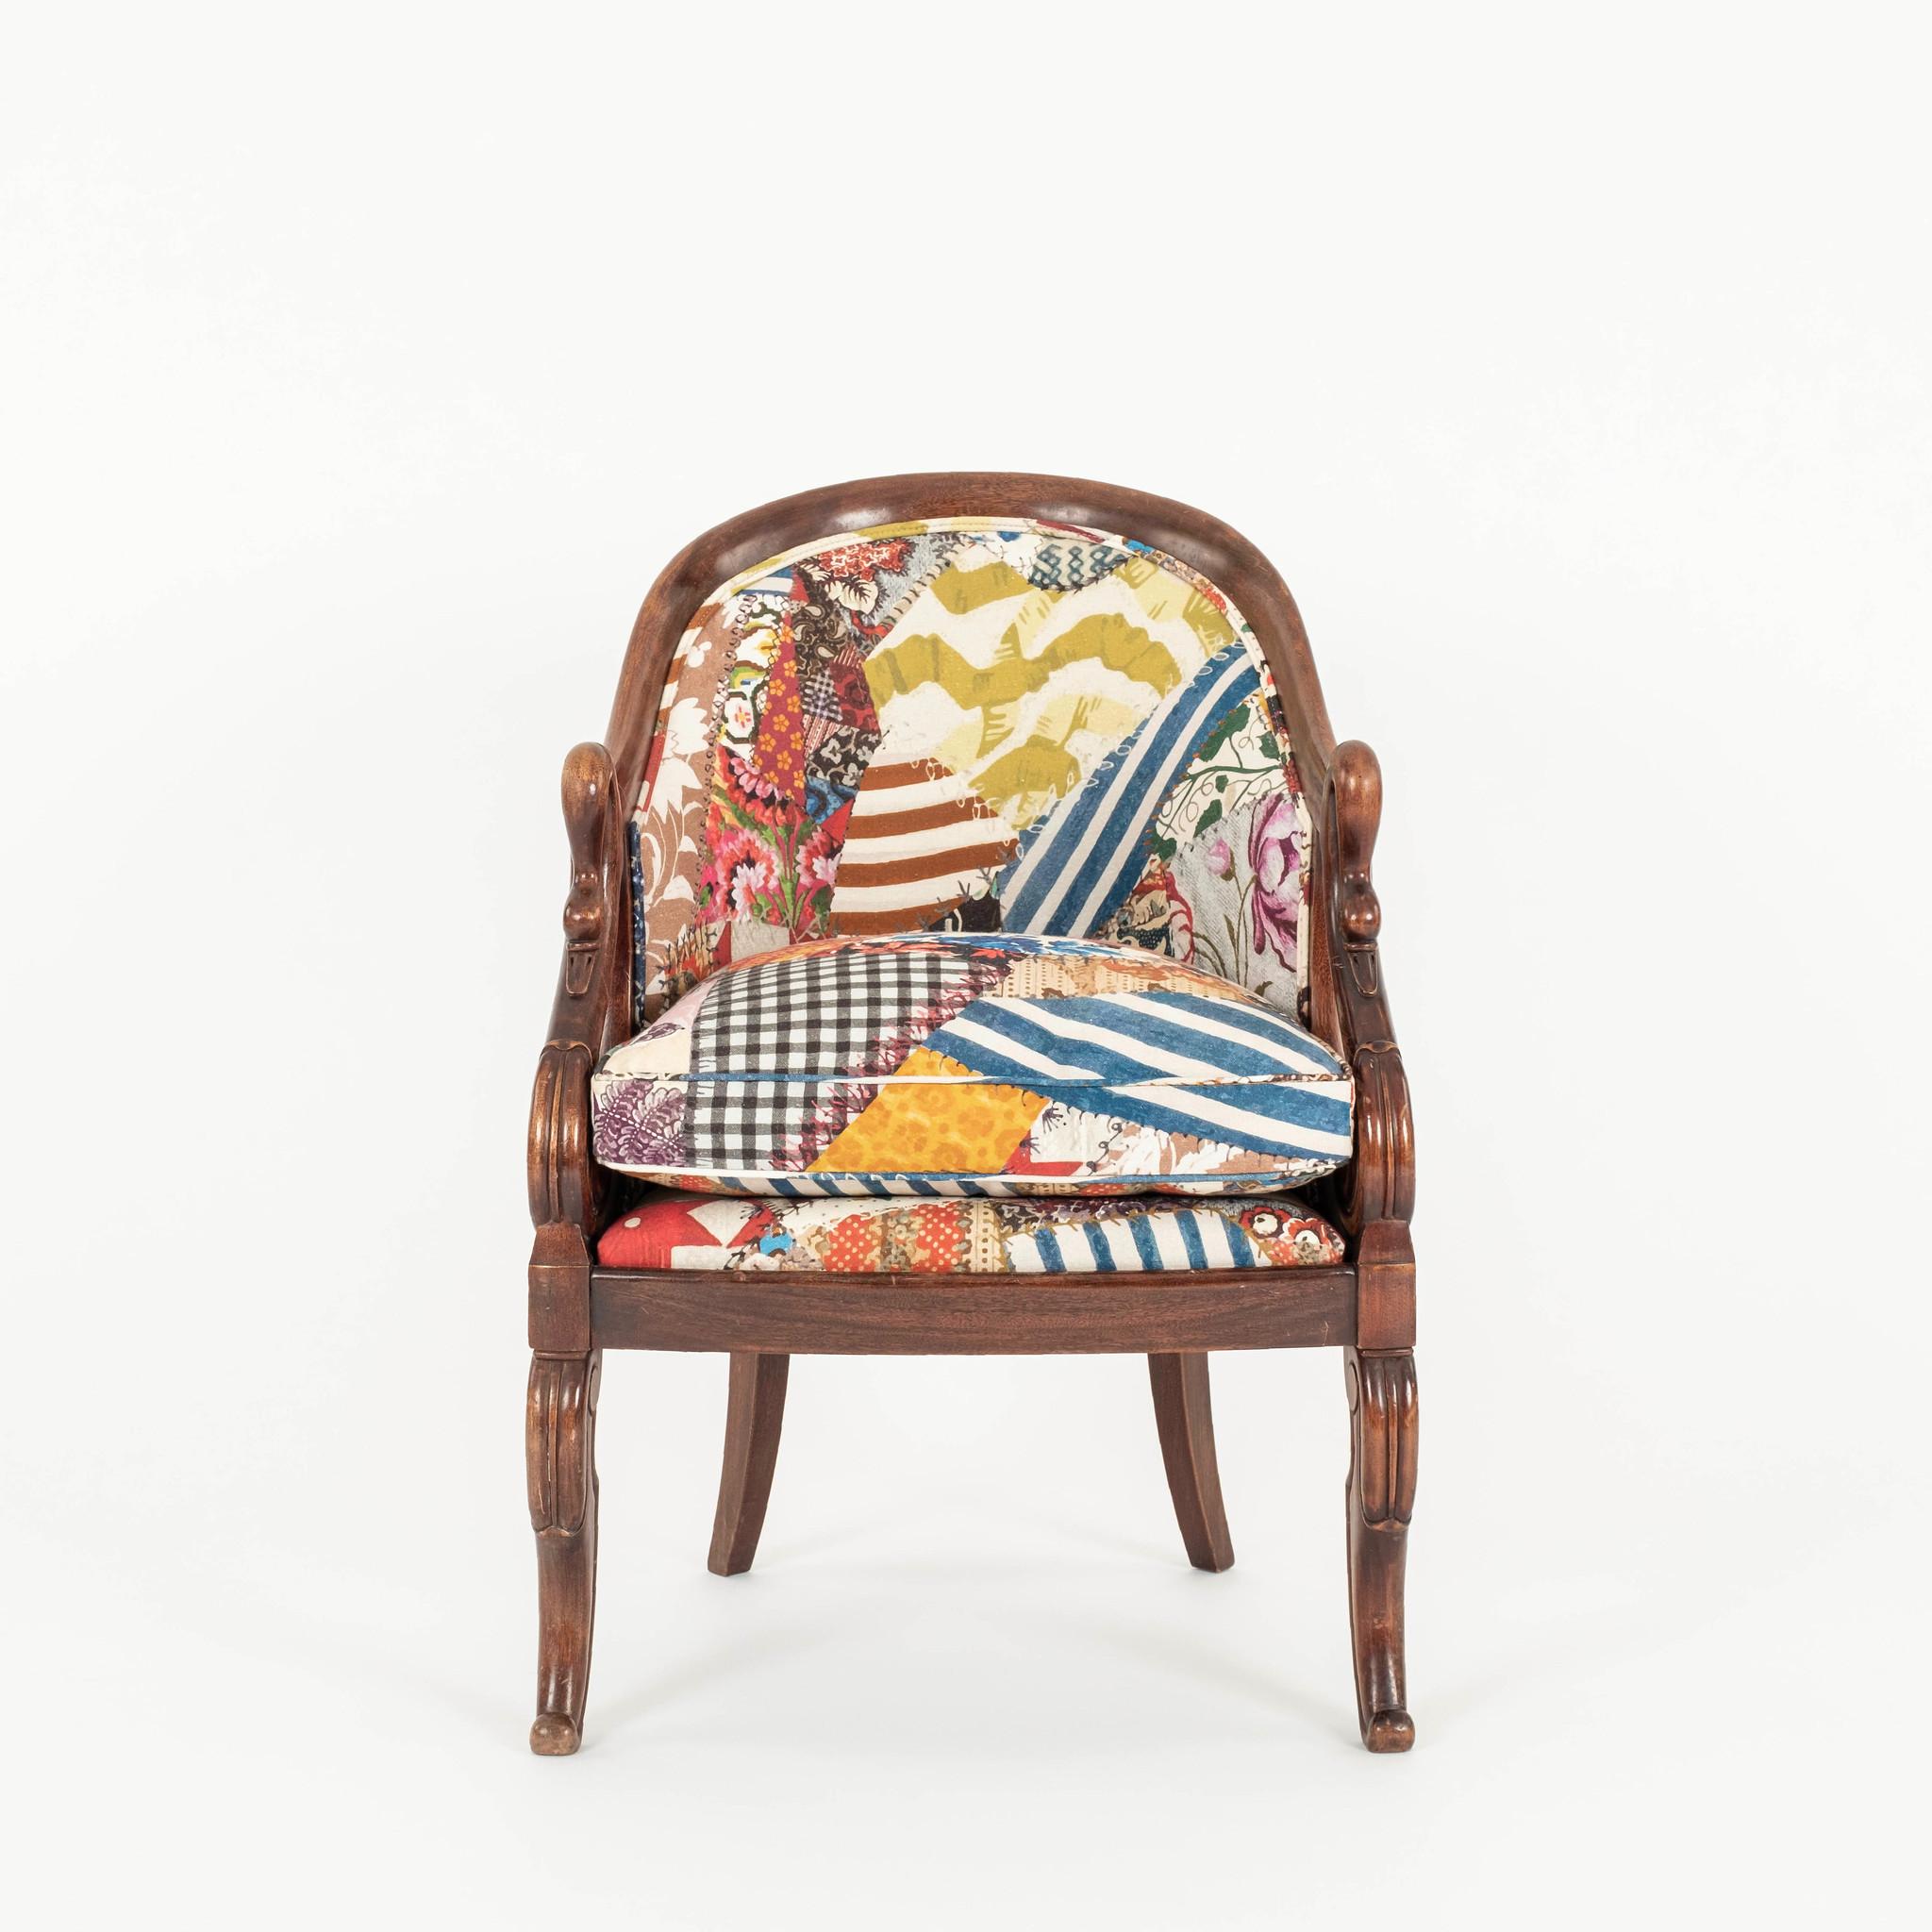 Pair 19th Century Neoclassical Style swan bergeres. Wonderfully restyled with Johnson Hartig for Libertine Potch PotchCrazy Quilt linen cotton fabric through Schumacher. Exuberant and colorful, this large-scale design, inspired by antique crazy